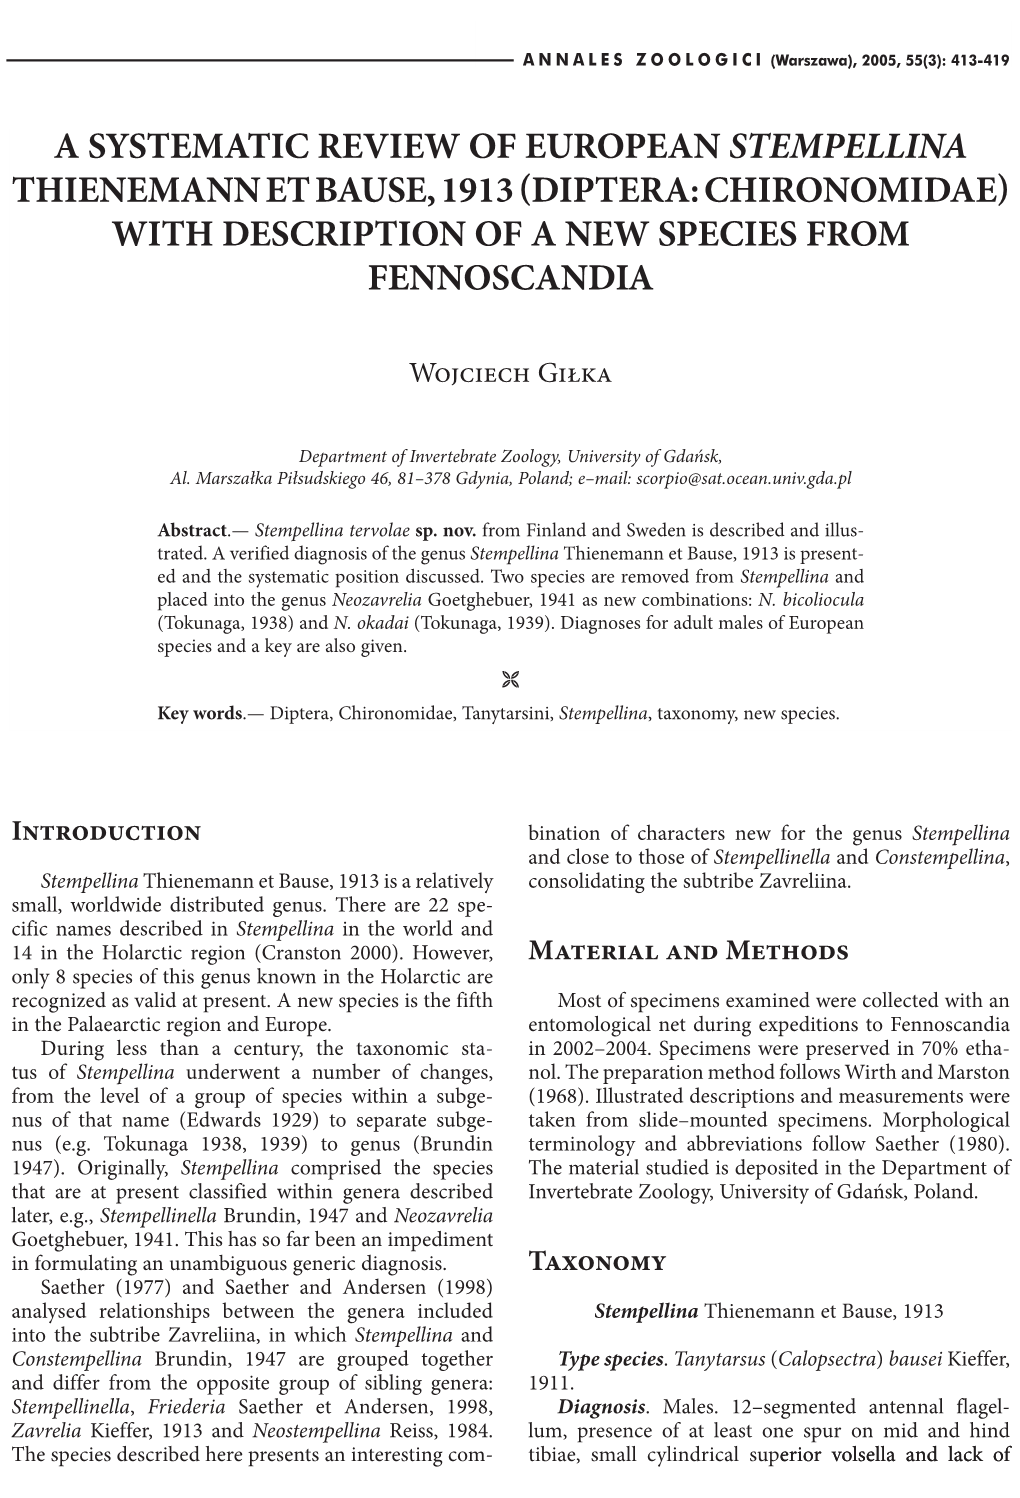 Diptera: Chironomidae) with Description of a New Species from Fennoscandia